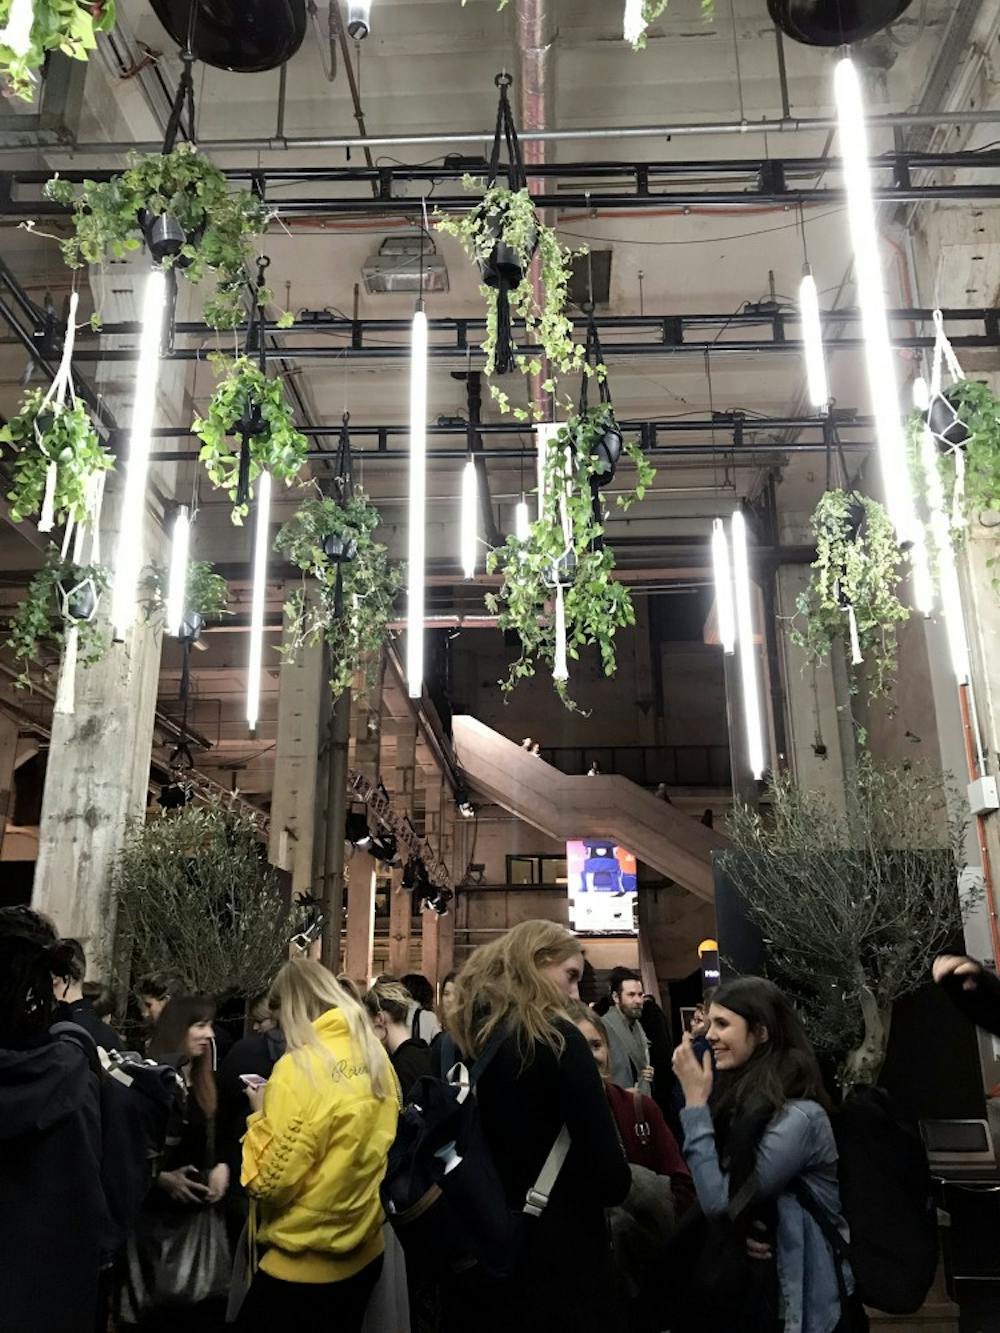 <p>The third annual&nbsp;Ethical Fashion Show Berlin took place Jan. 16-18 at the former Kraftwerk power plant, now a vibrant and energetic venue for exhibits and events. It involved over 120 vendors and a catwalk finale with 25 models wearing the hottest ethical styles.</p>